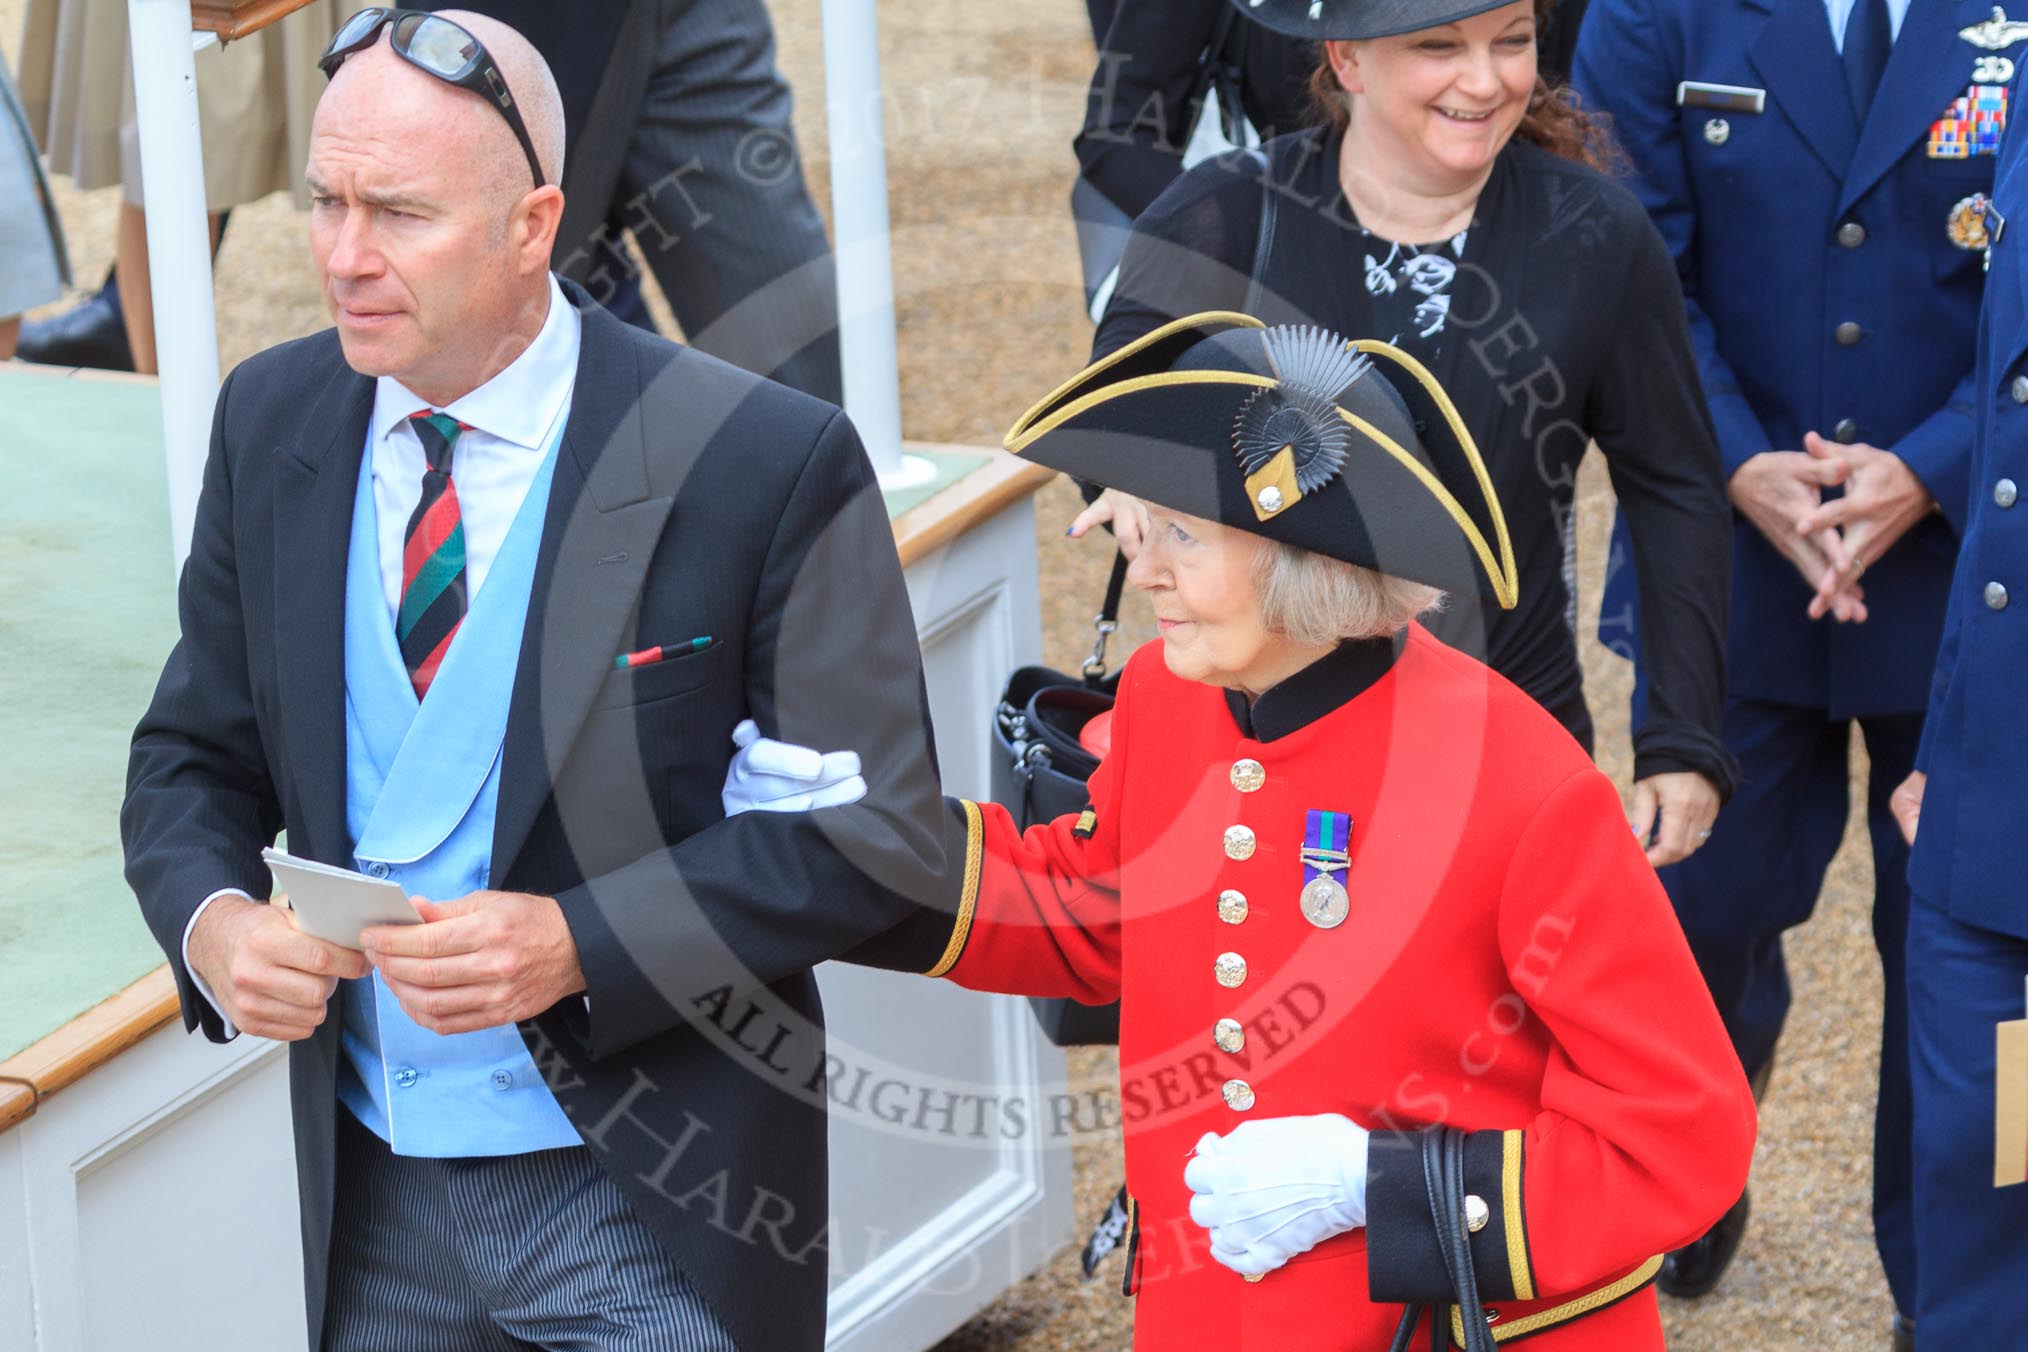 Female Chelsea Pensioner at Trooping the Colour 2018, The Queen's Birthday Parade at Horse Guards Parade, Westminster, London, 9 June 2018, 09:30.